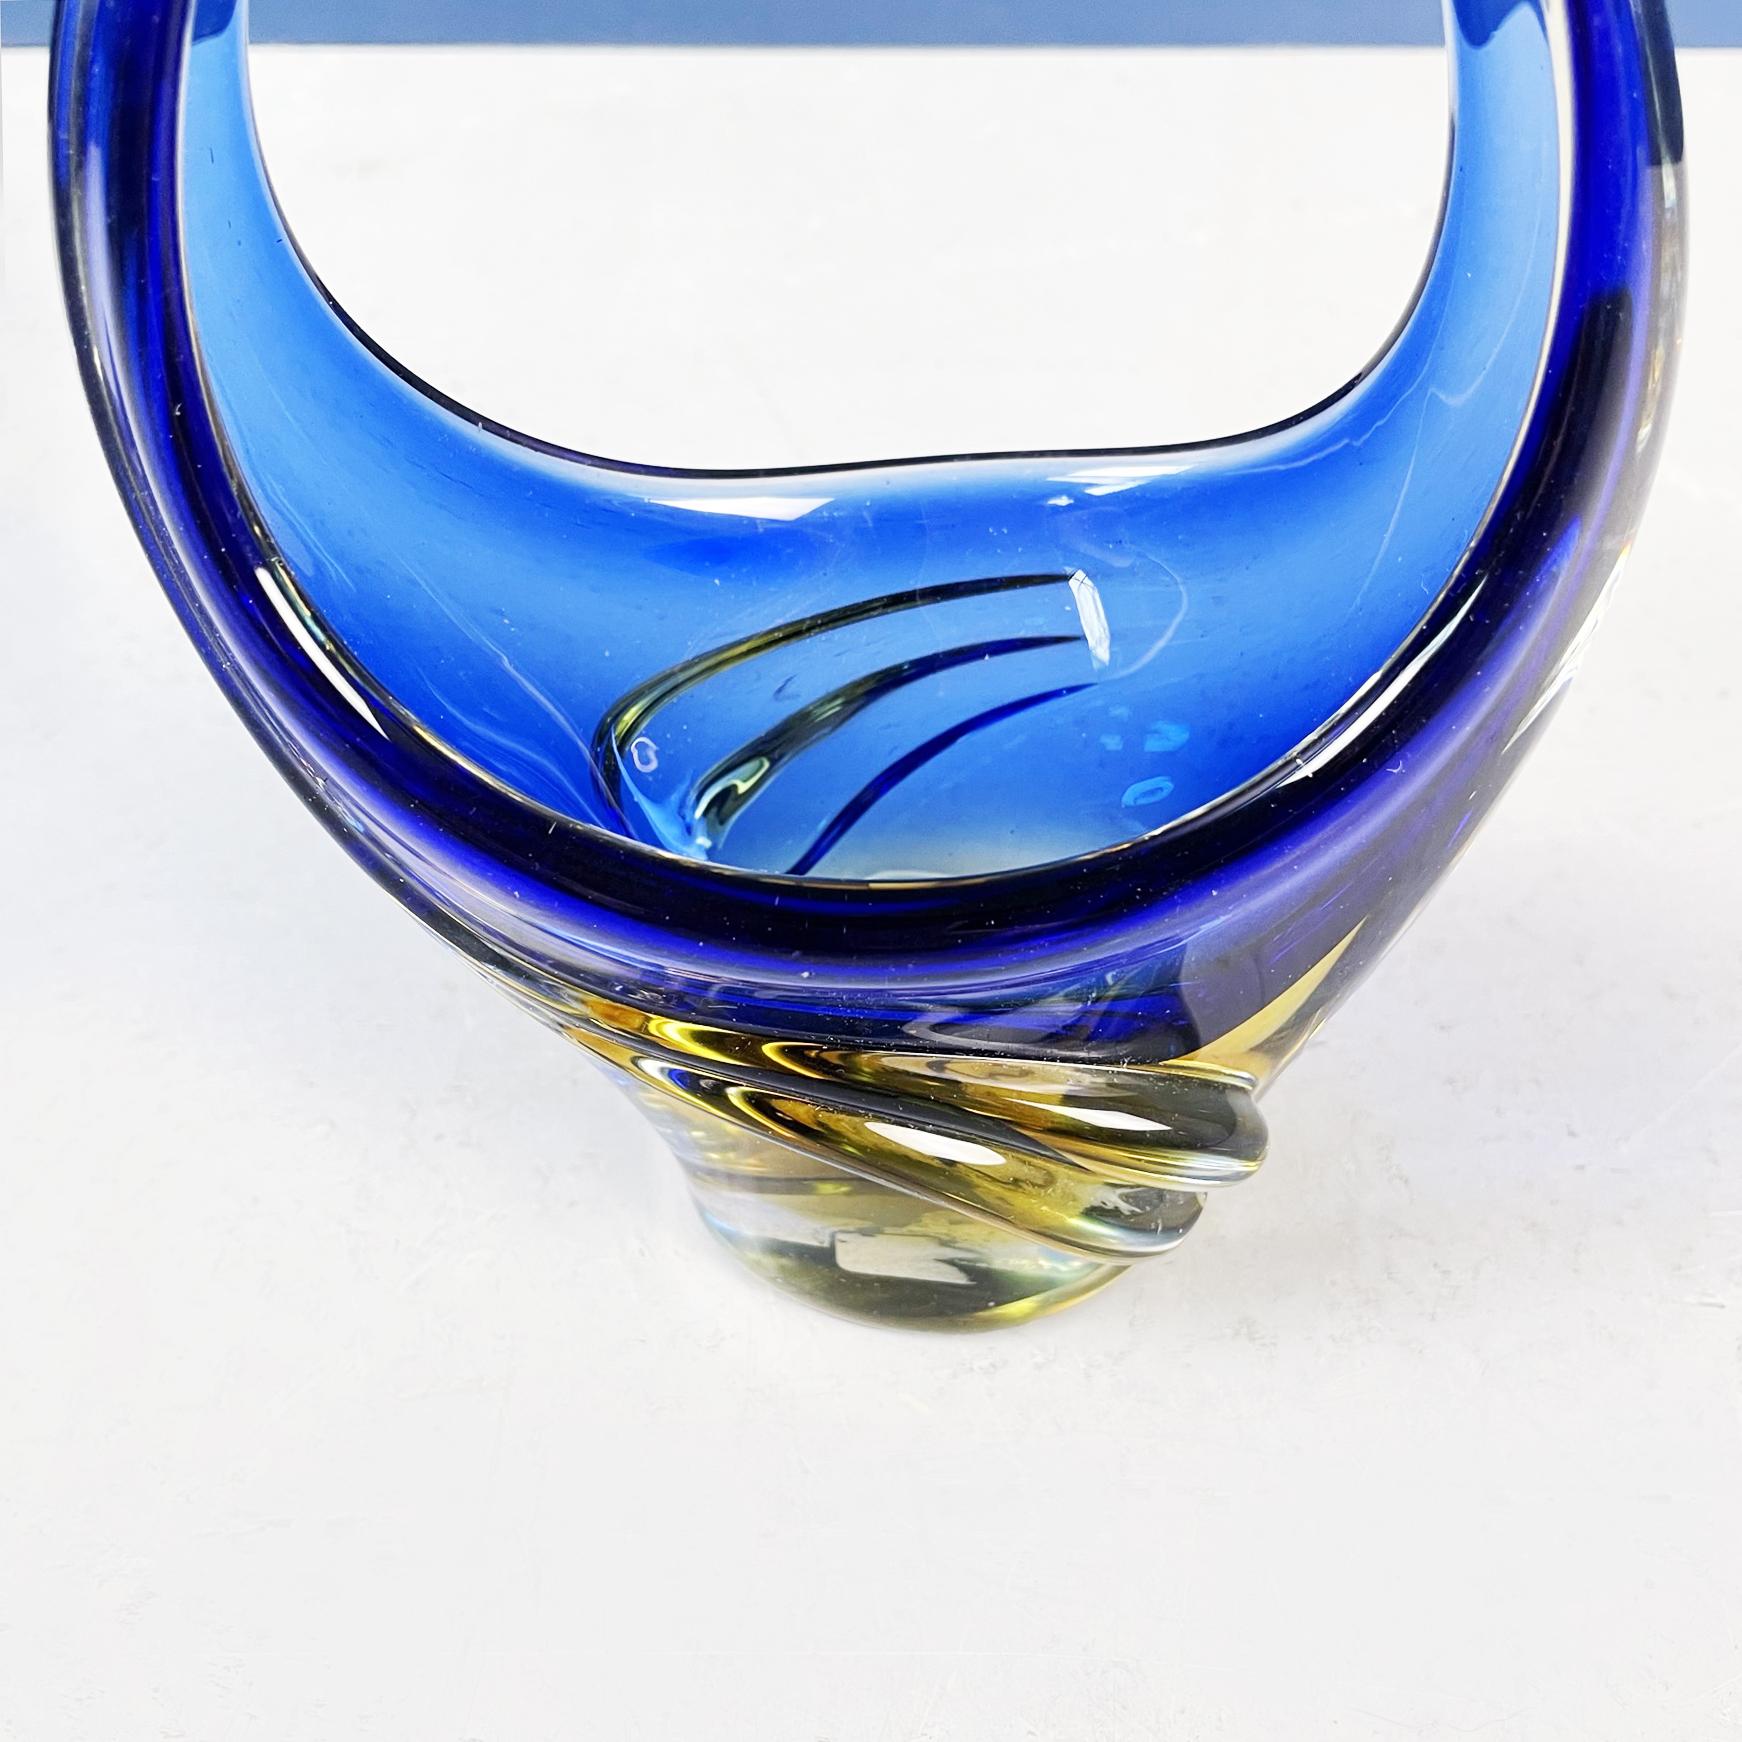 Italian Modern Sculpture in Blue and Yellow Murano Glass, 1970s For Sale 3